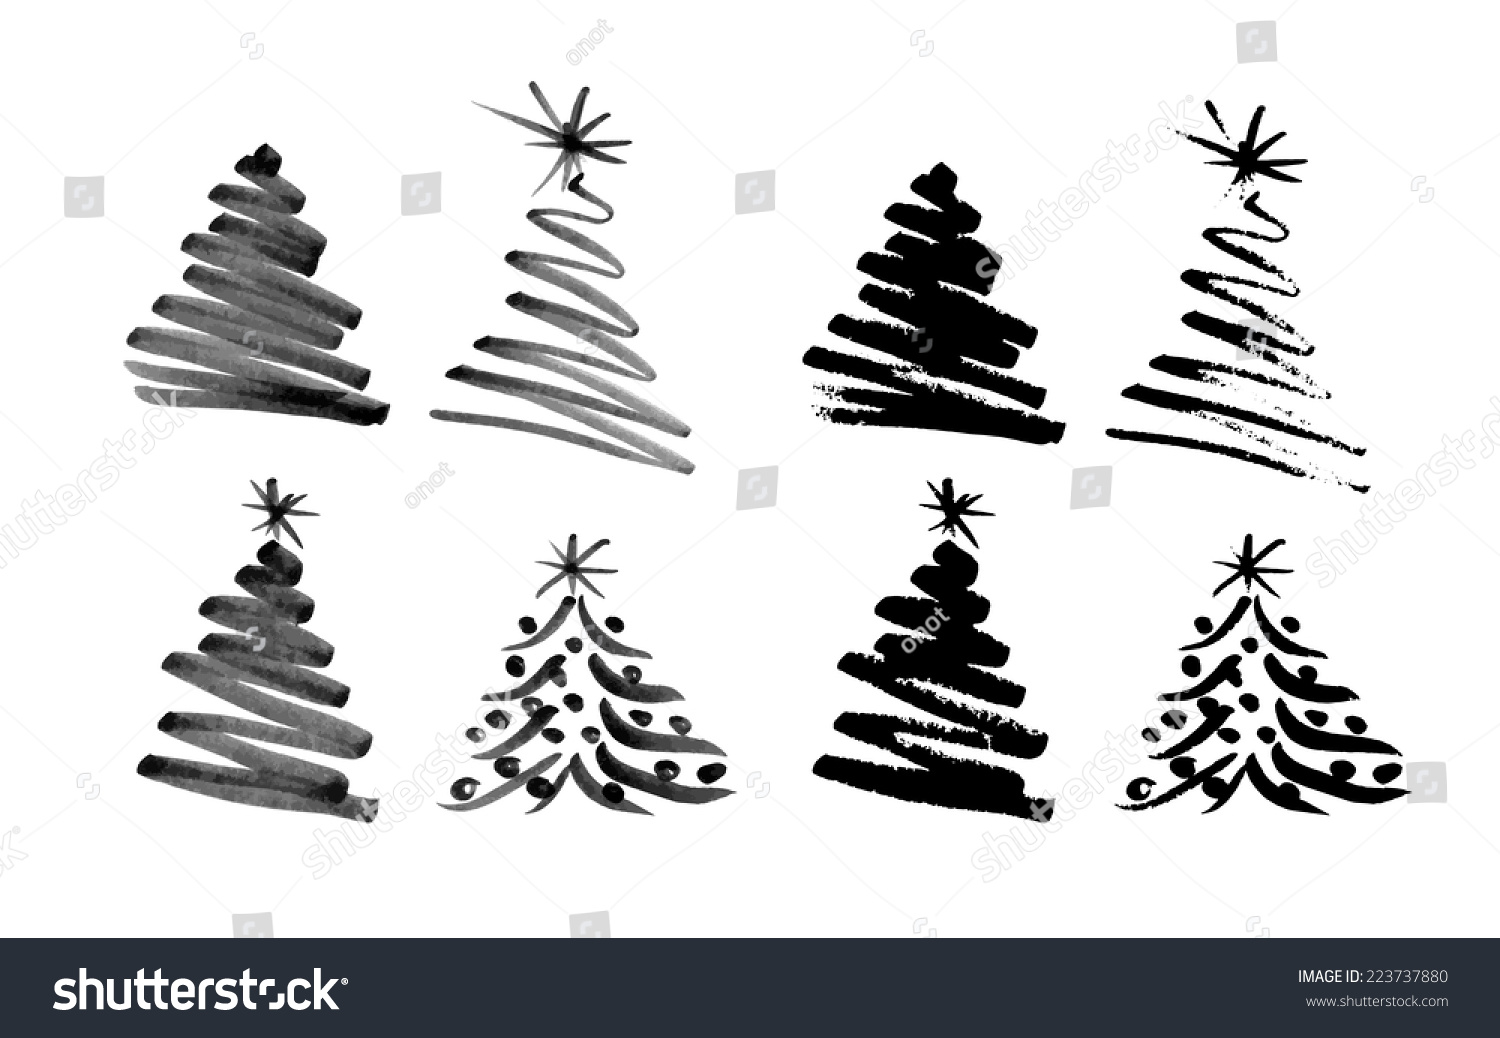 298,348 Christmas Tree Drawing Images, Stock Photos & Vectors ...